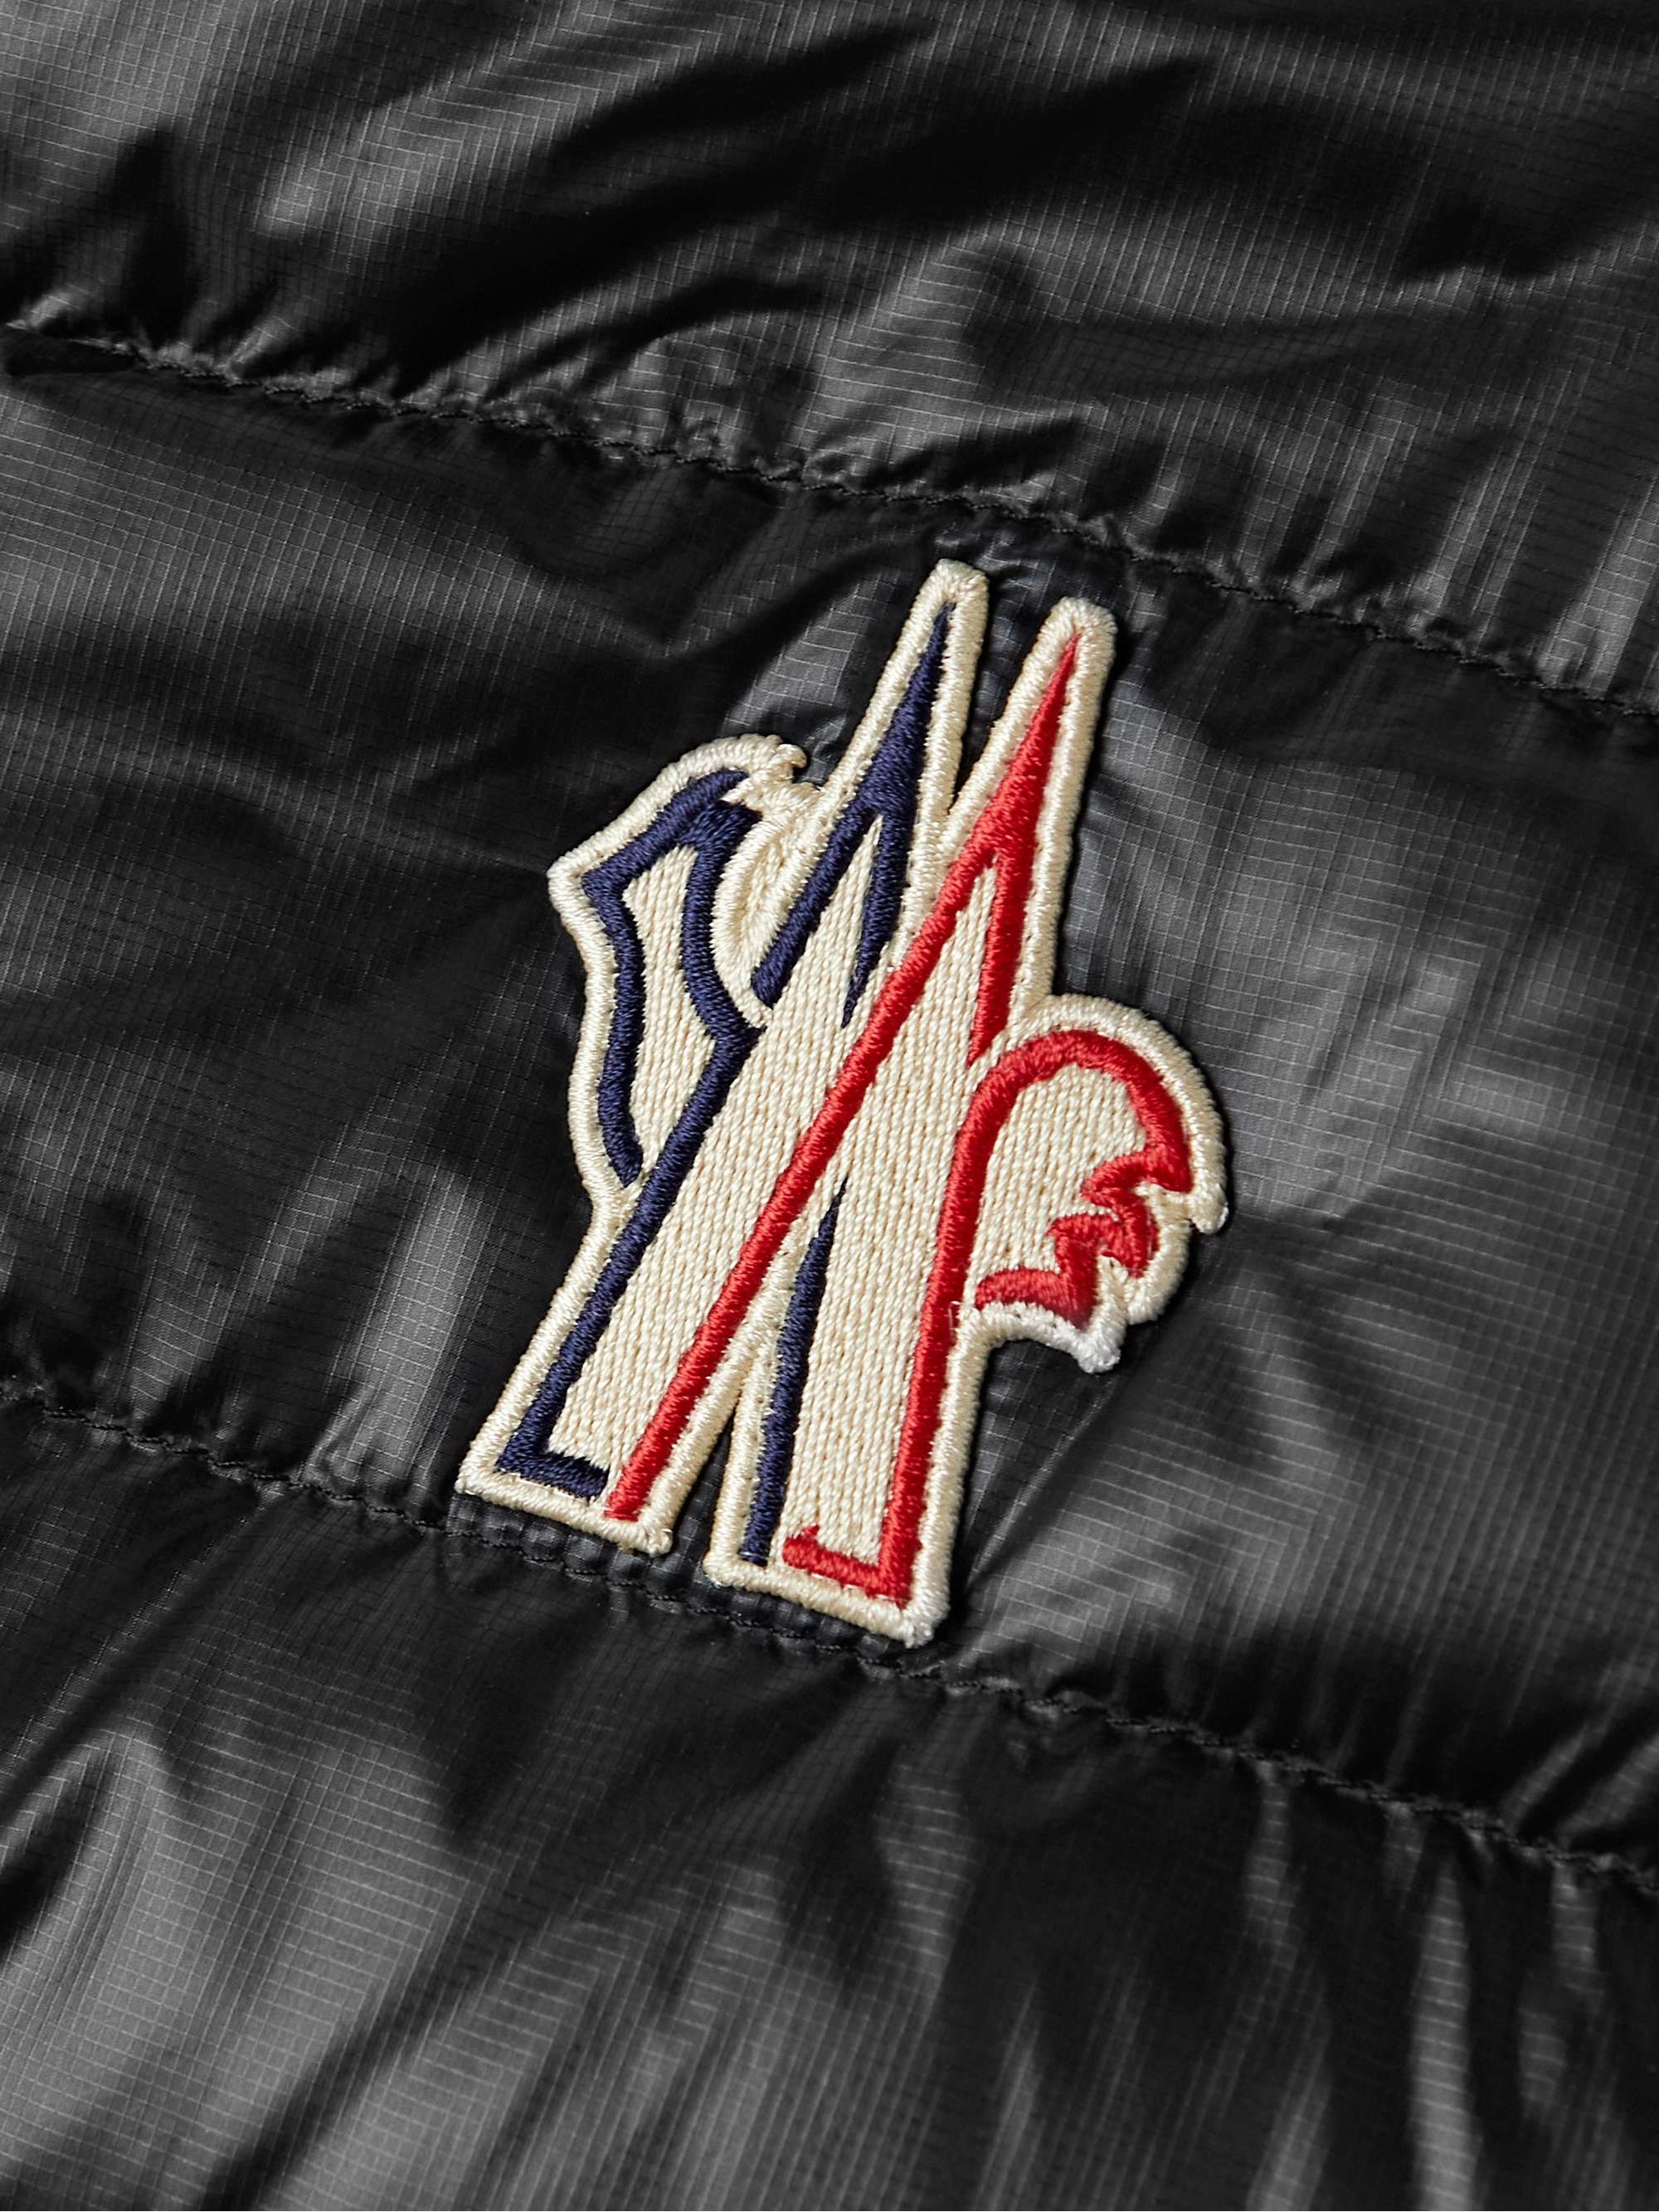 MONCLER GRENOBLE Hers Slim-Fit Logo-Appliquéd Quilted Shell Down Jacket